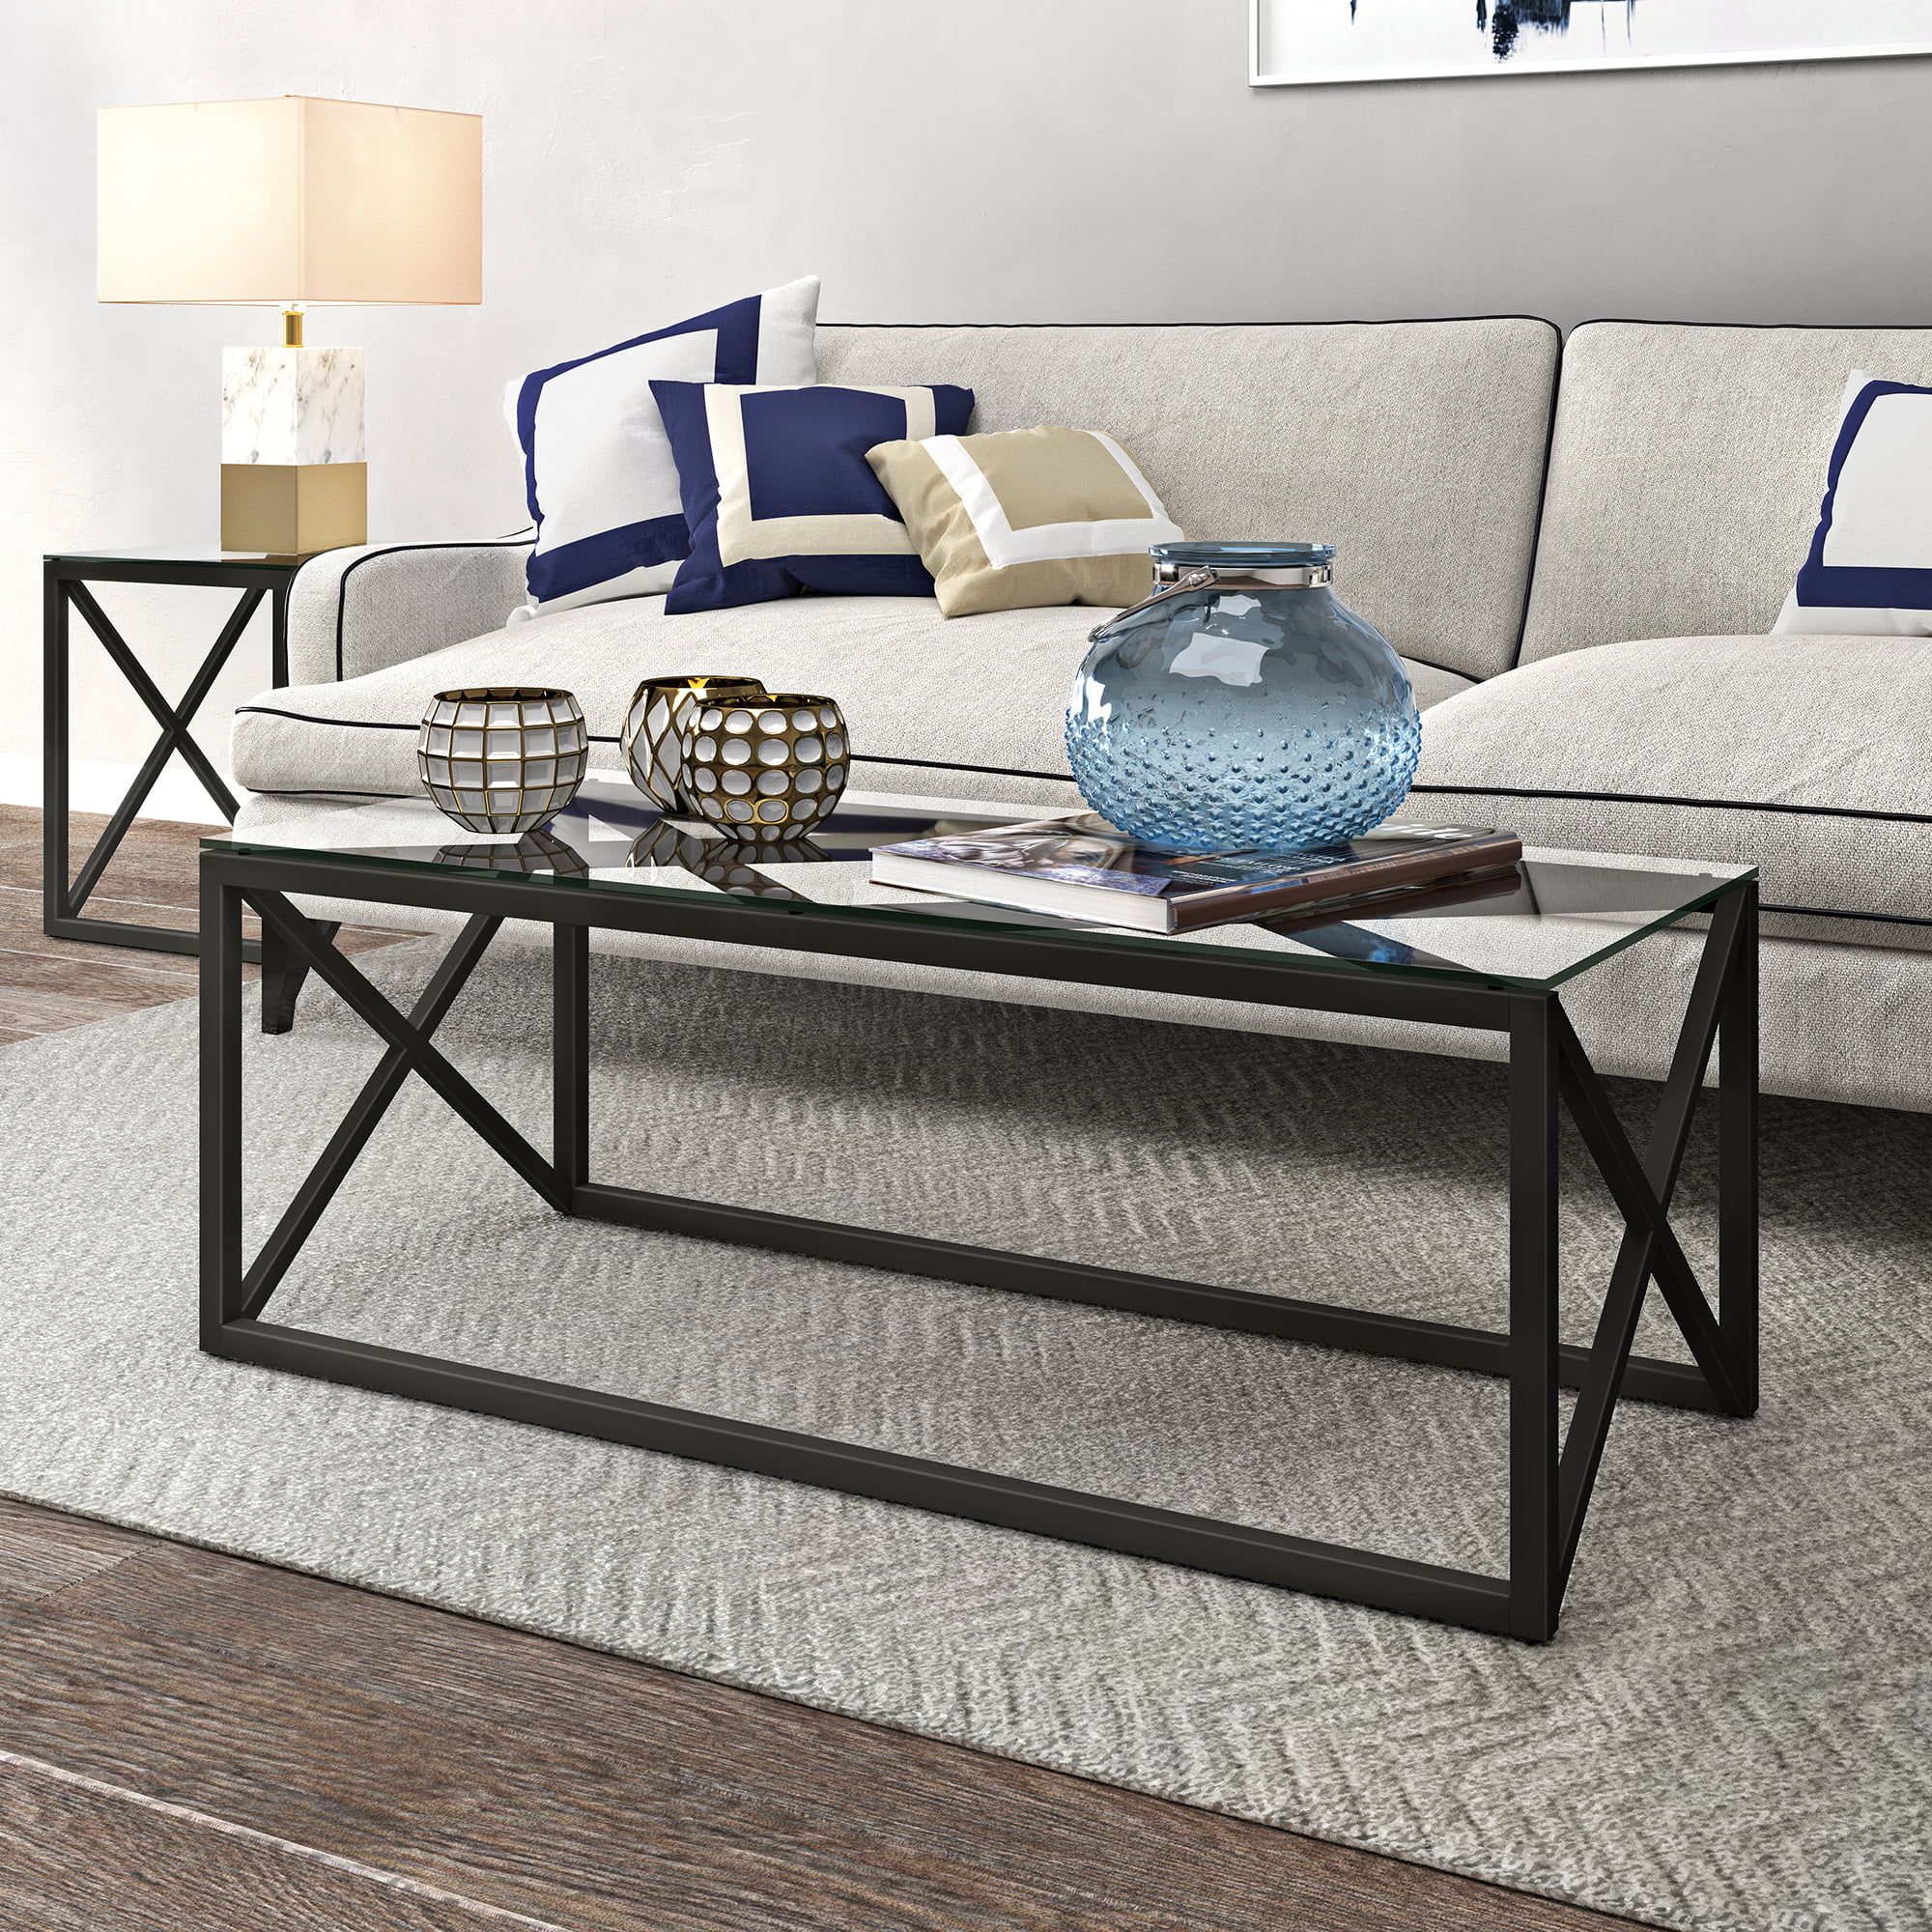 Mid Century Modern Glass Coffee Table, Rectangle Accent Table In In Rectangular Coffee Tables With Pedestal Bases (View 11 of 20)